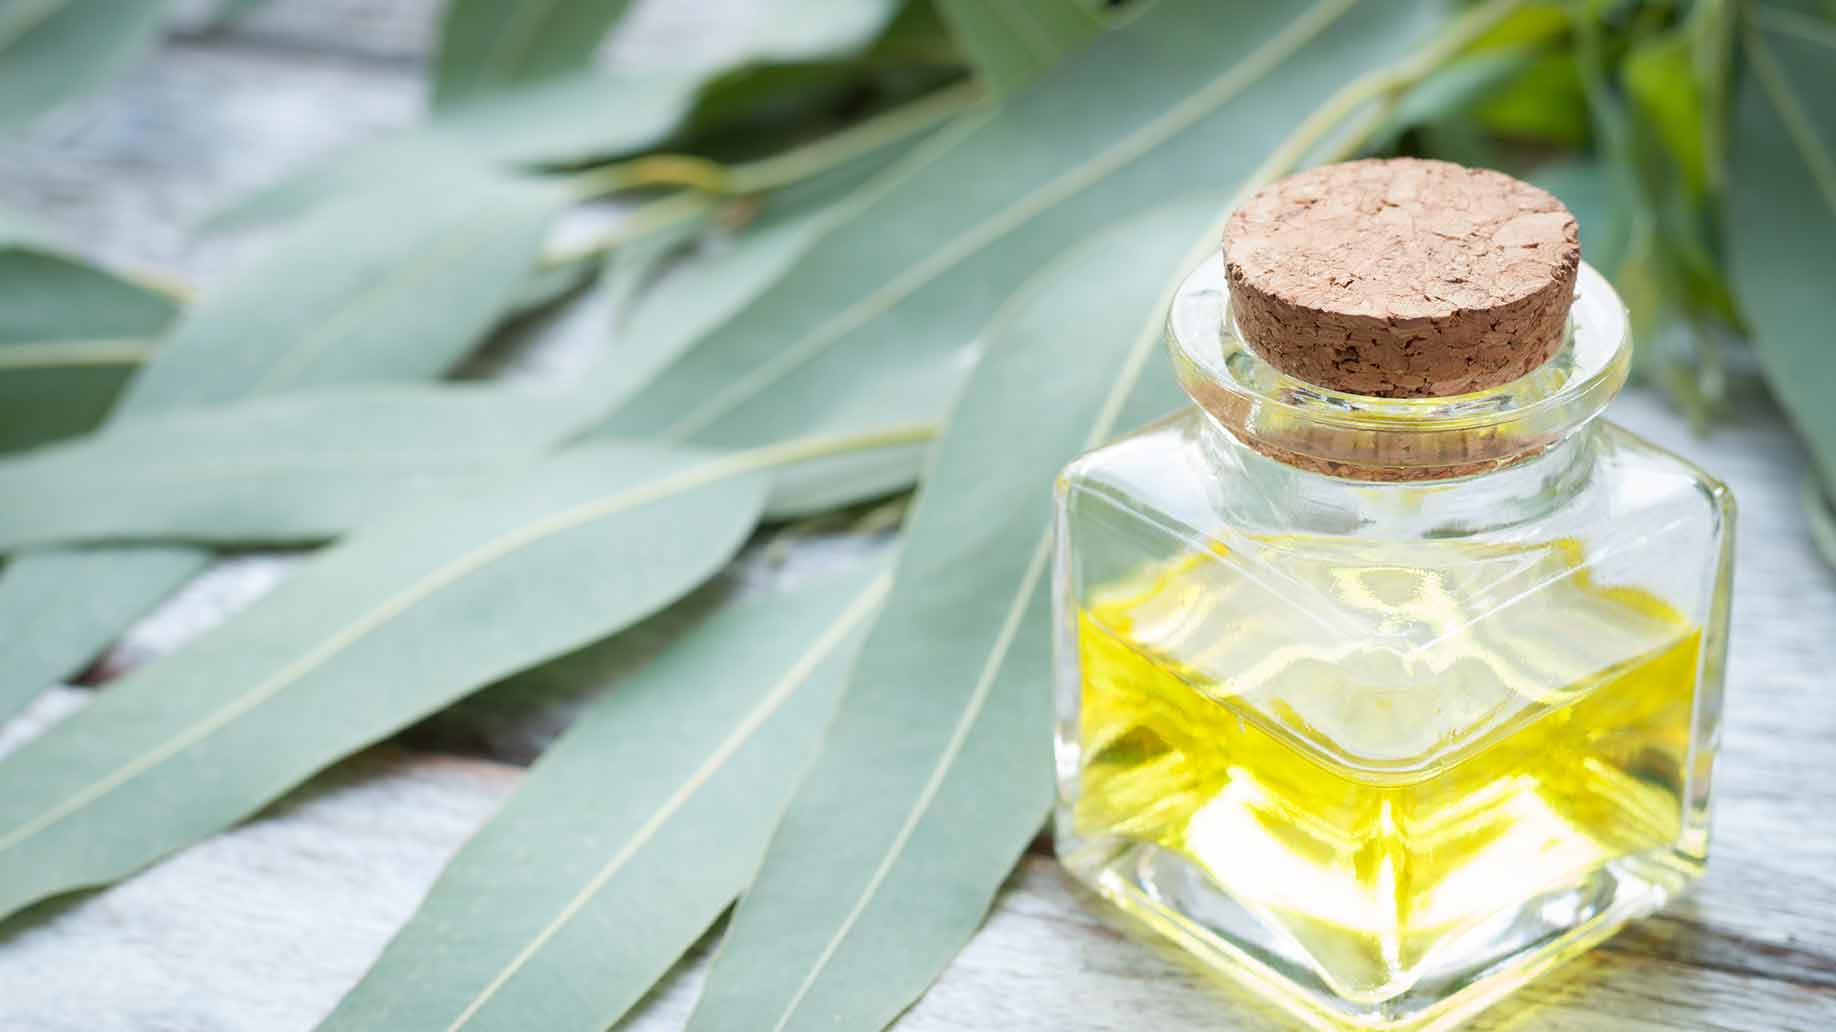 eucalyptus essential oil natural health benefits cold cough flu fever decongestant expectorant anti-inflammatory analgesic asthma bronchitis